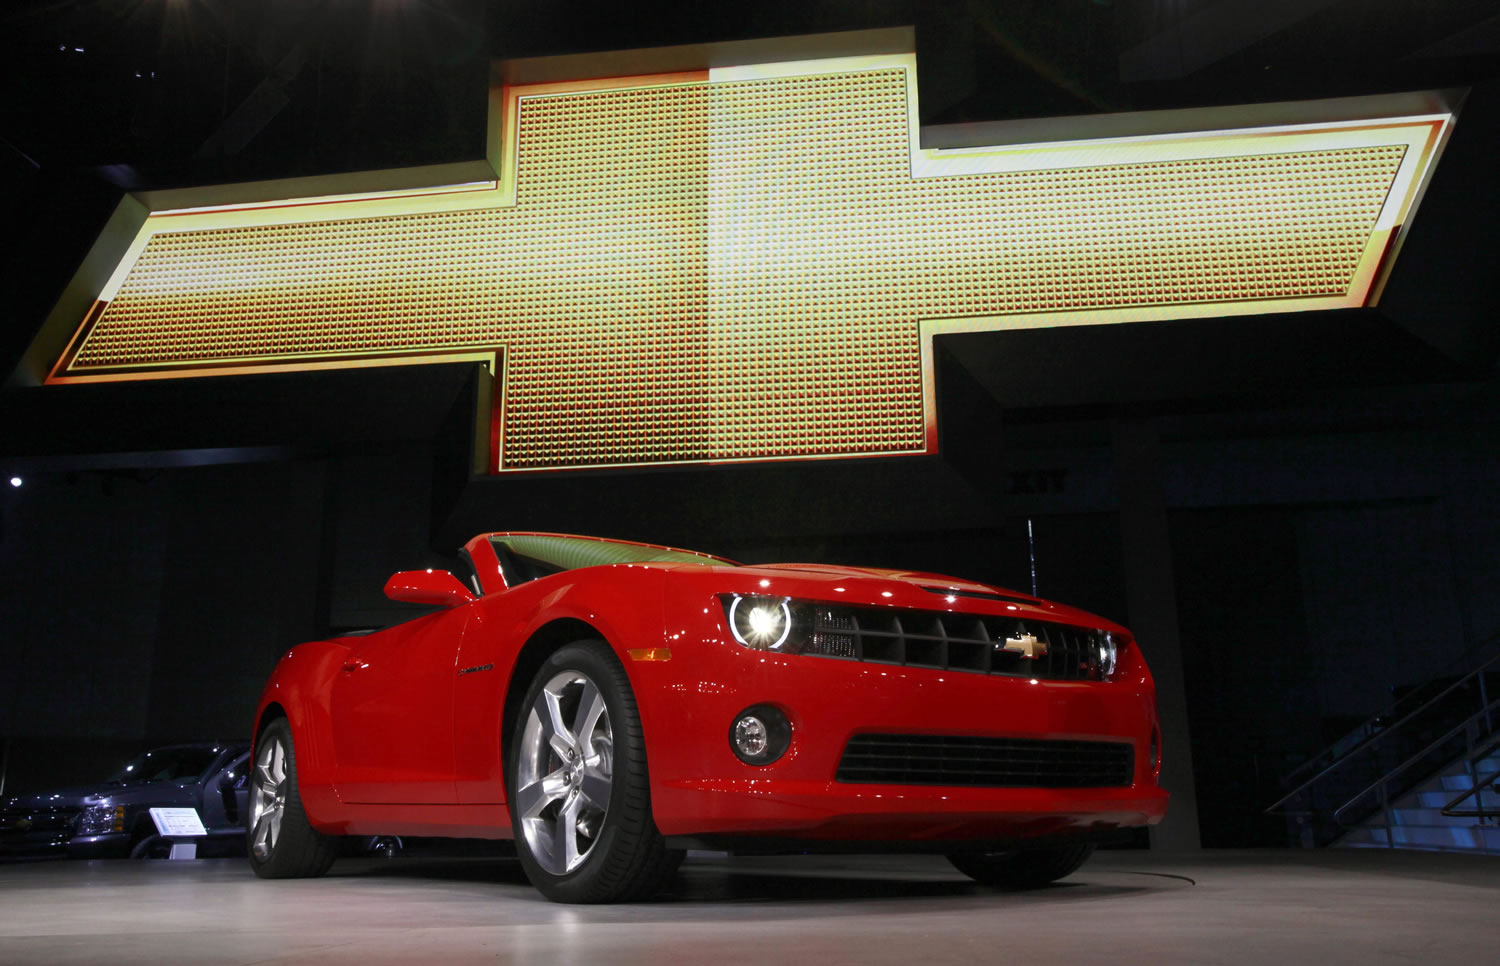 The 2011 Chevrolet Camaro convertible debuts at the Los Angeles Auto Show. General Motors is recalling nearly 512,000 Chevrolet Camaro muscle cars from the 2010 to 2014 model years.